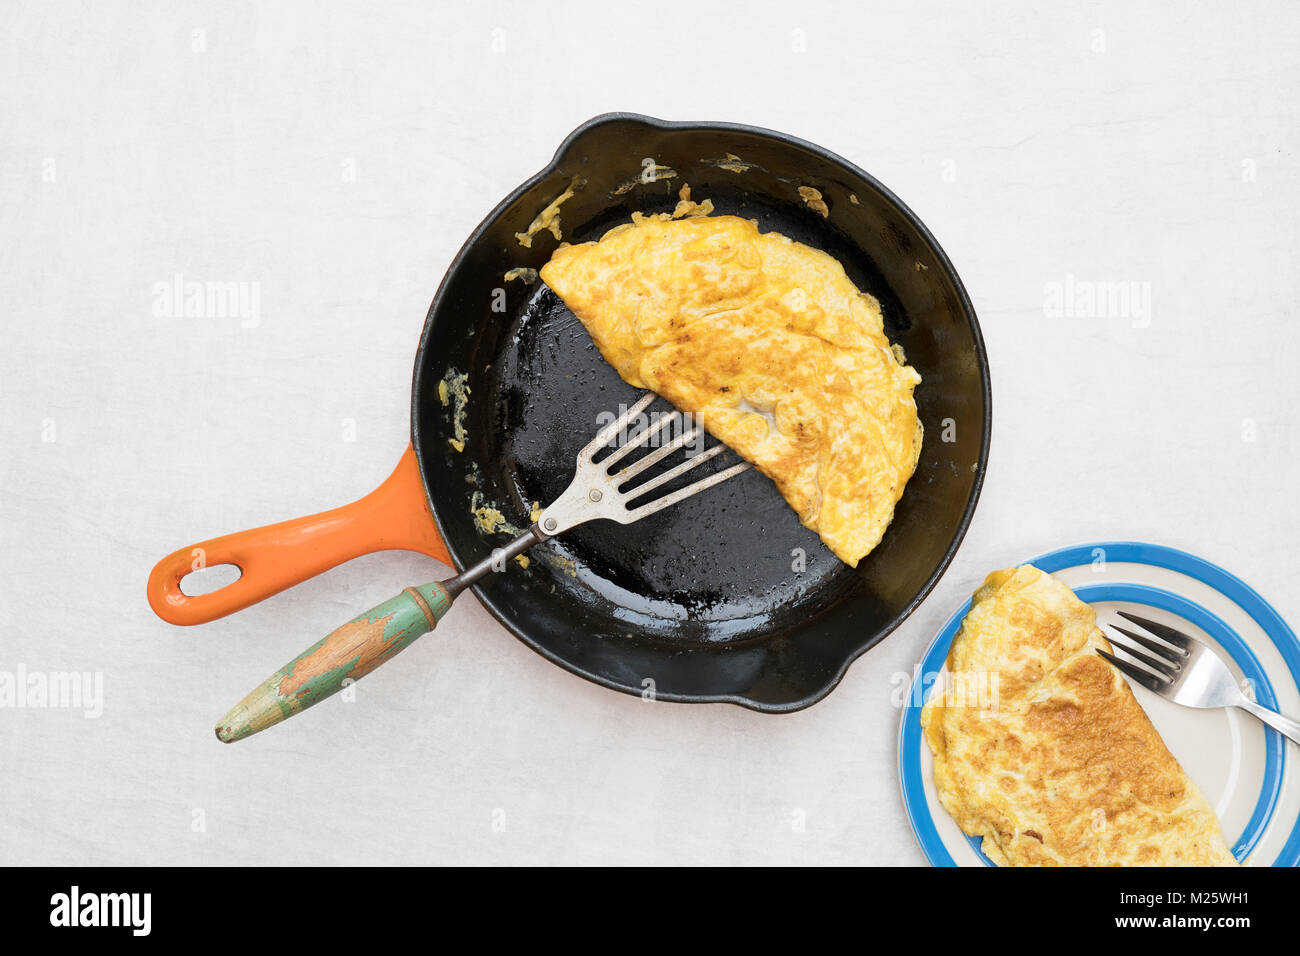 Omelette with melted cheese in a frying pan on a light background Stock Photo